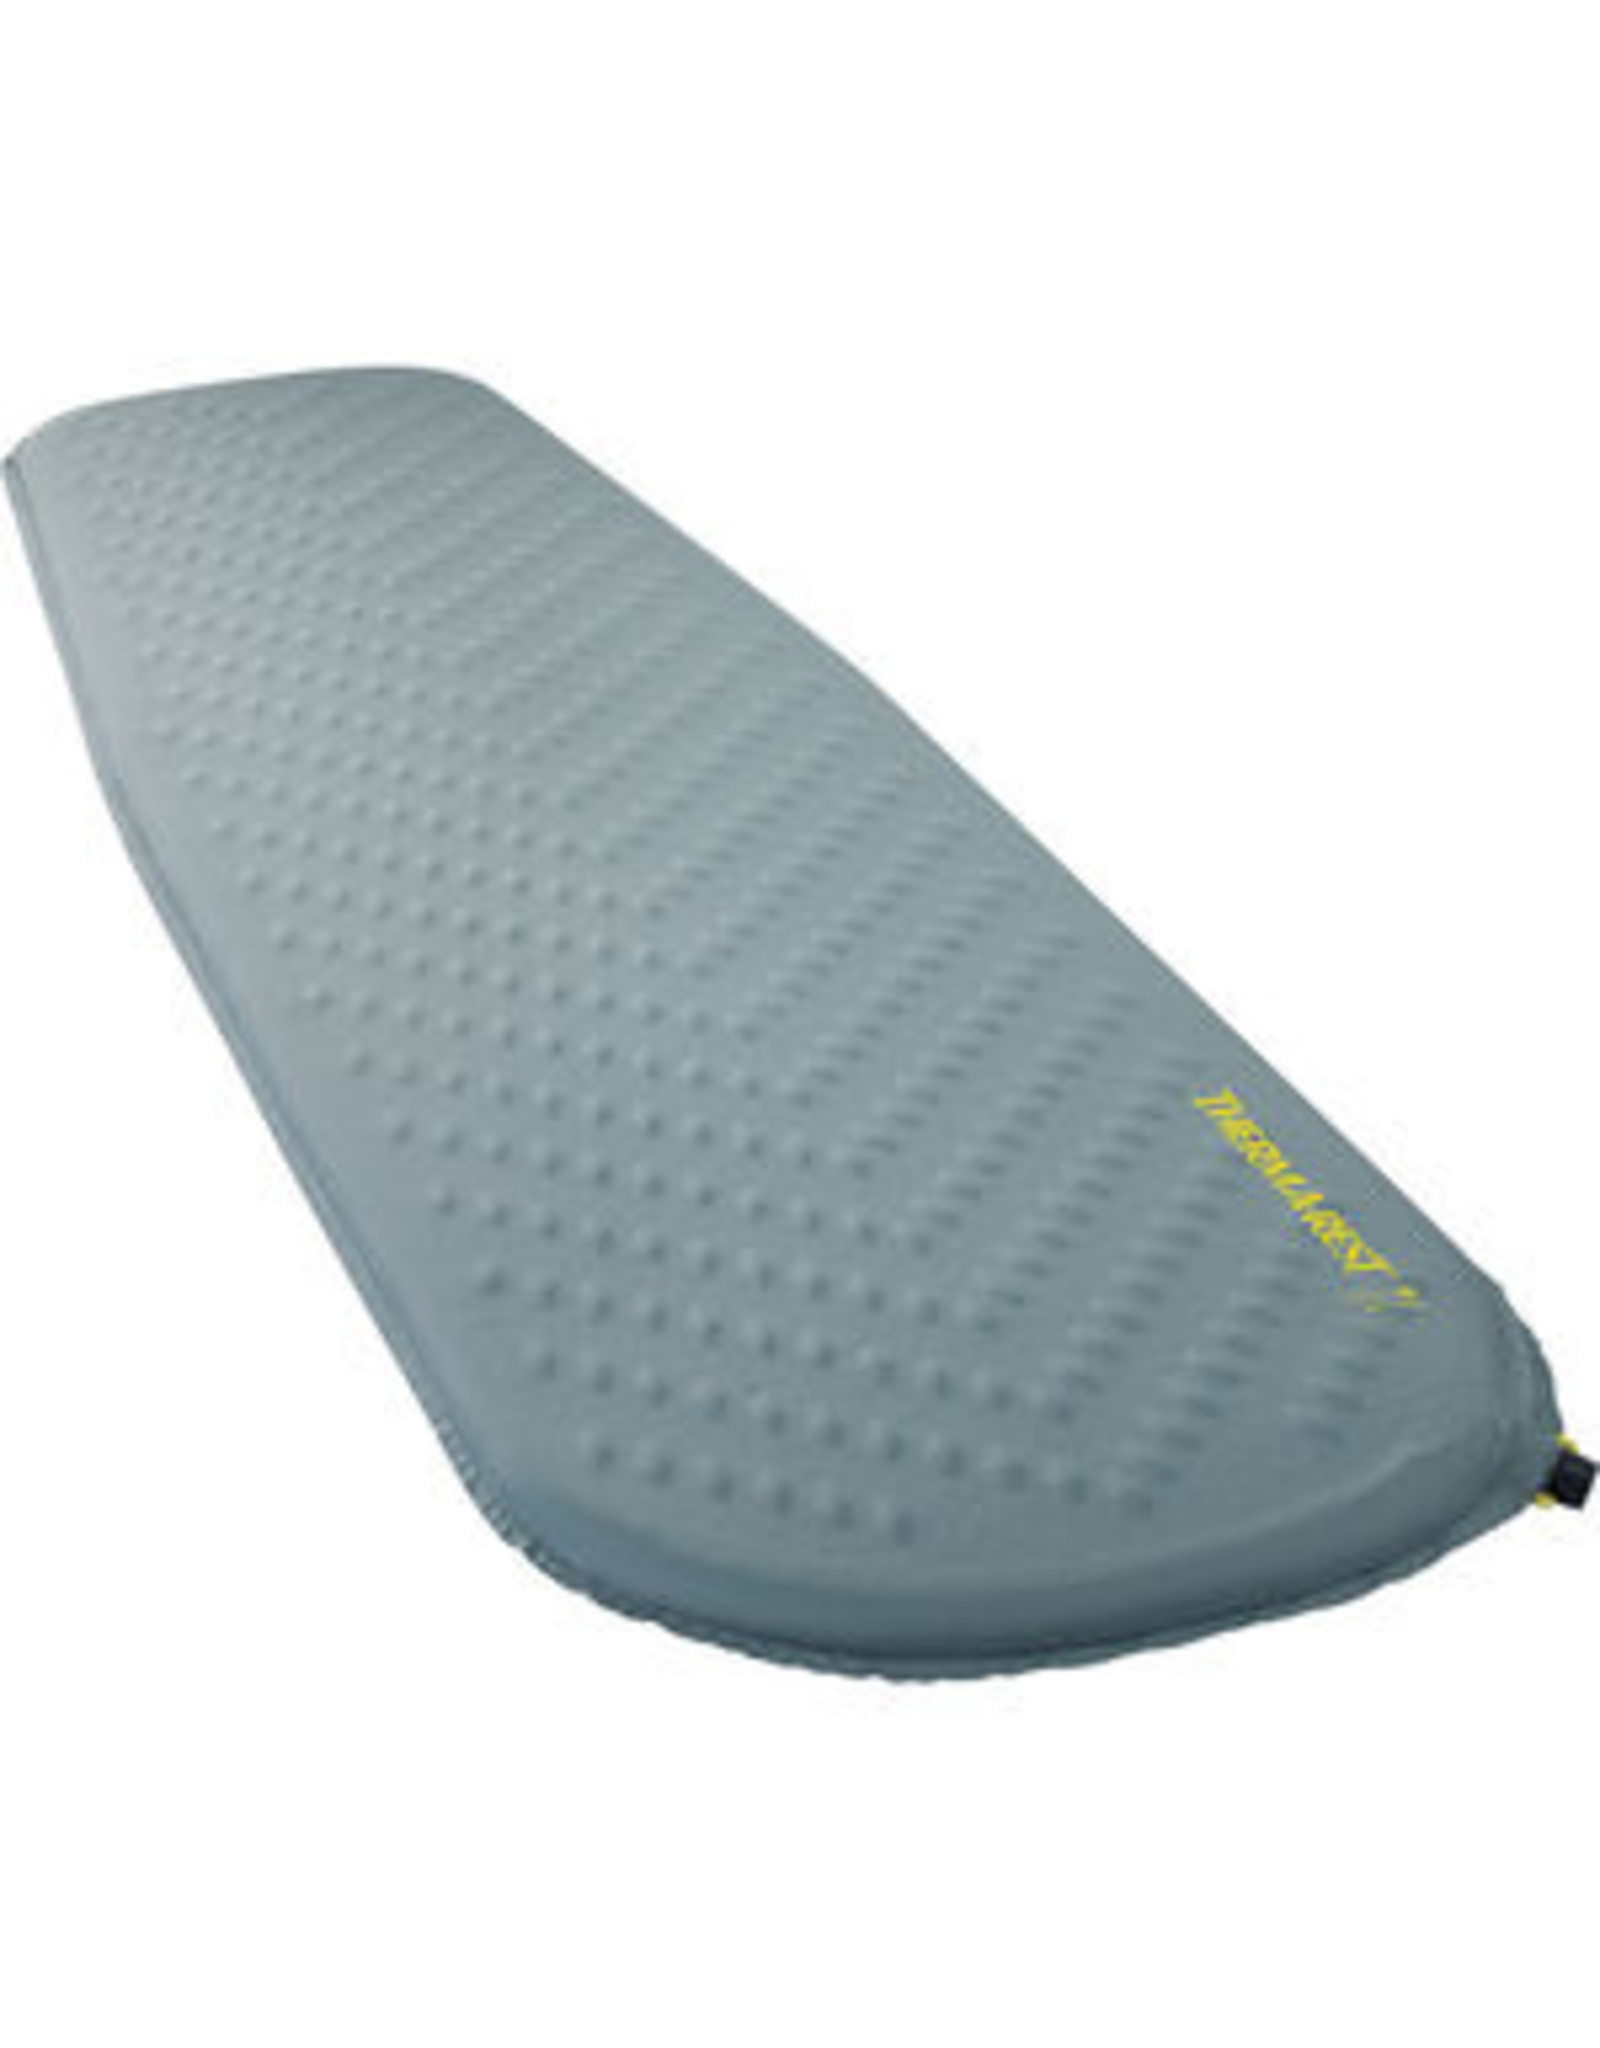 THERM-A-REST TRAIL LITE TROOPER GREY